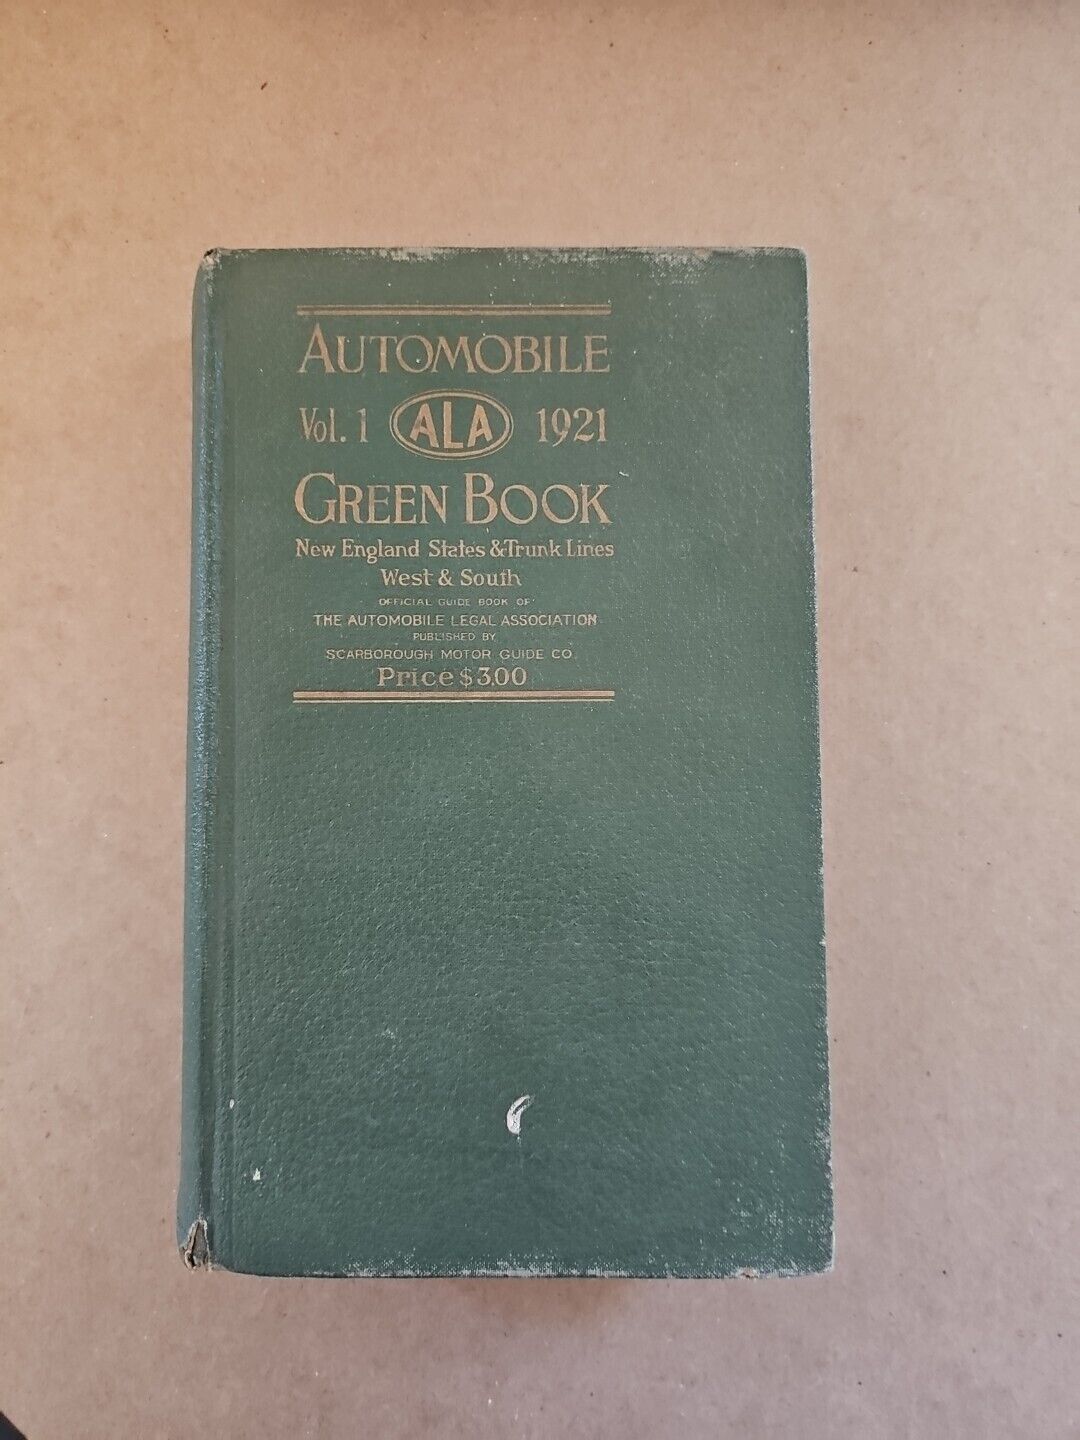 Vintage 1921 Automobile Vol. 1 ALA Green Book New England States and Trunk Lines